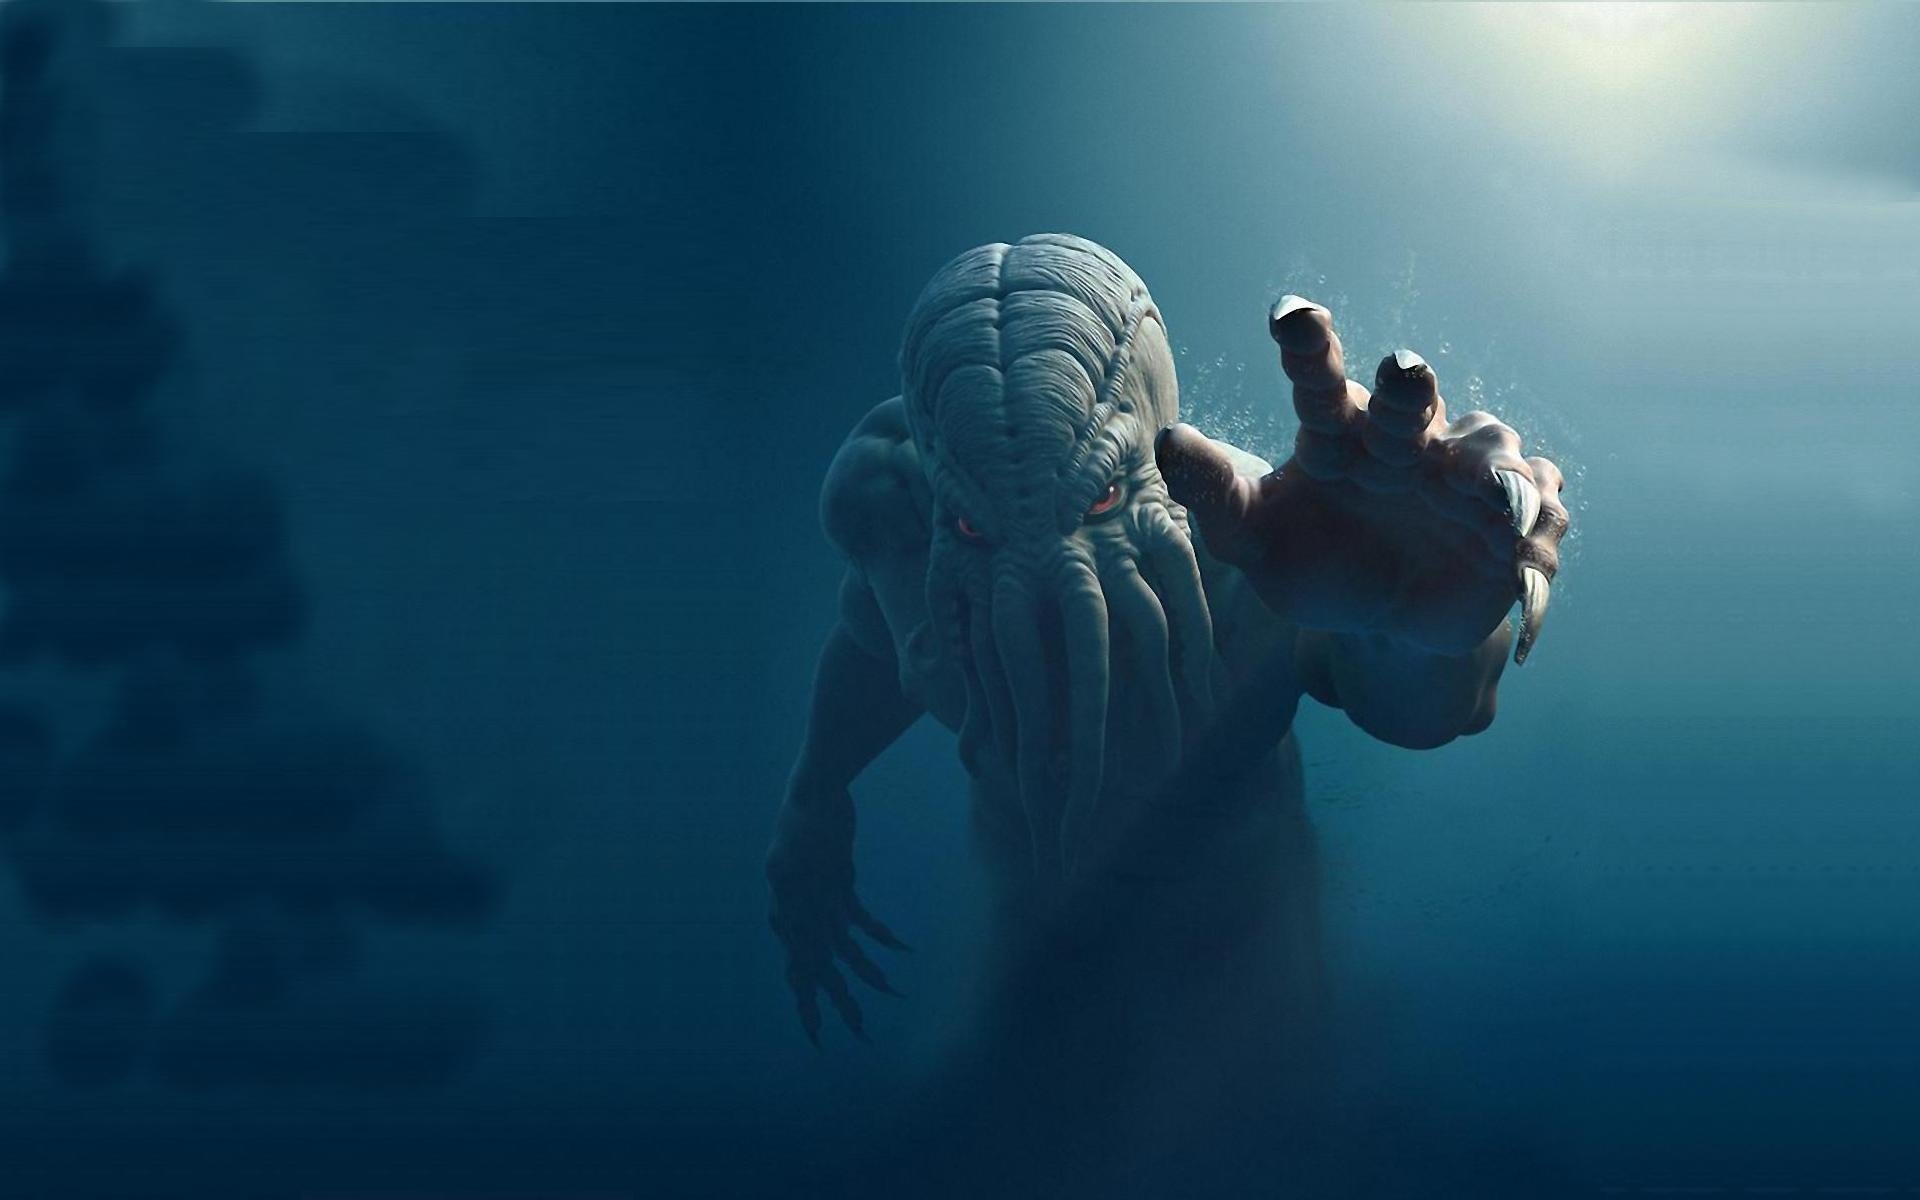 creature-cthulhu-h-p-lovecraft-hd-wallpapers-desktop-and-mobile